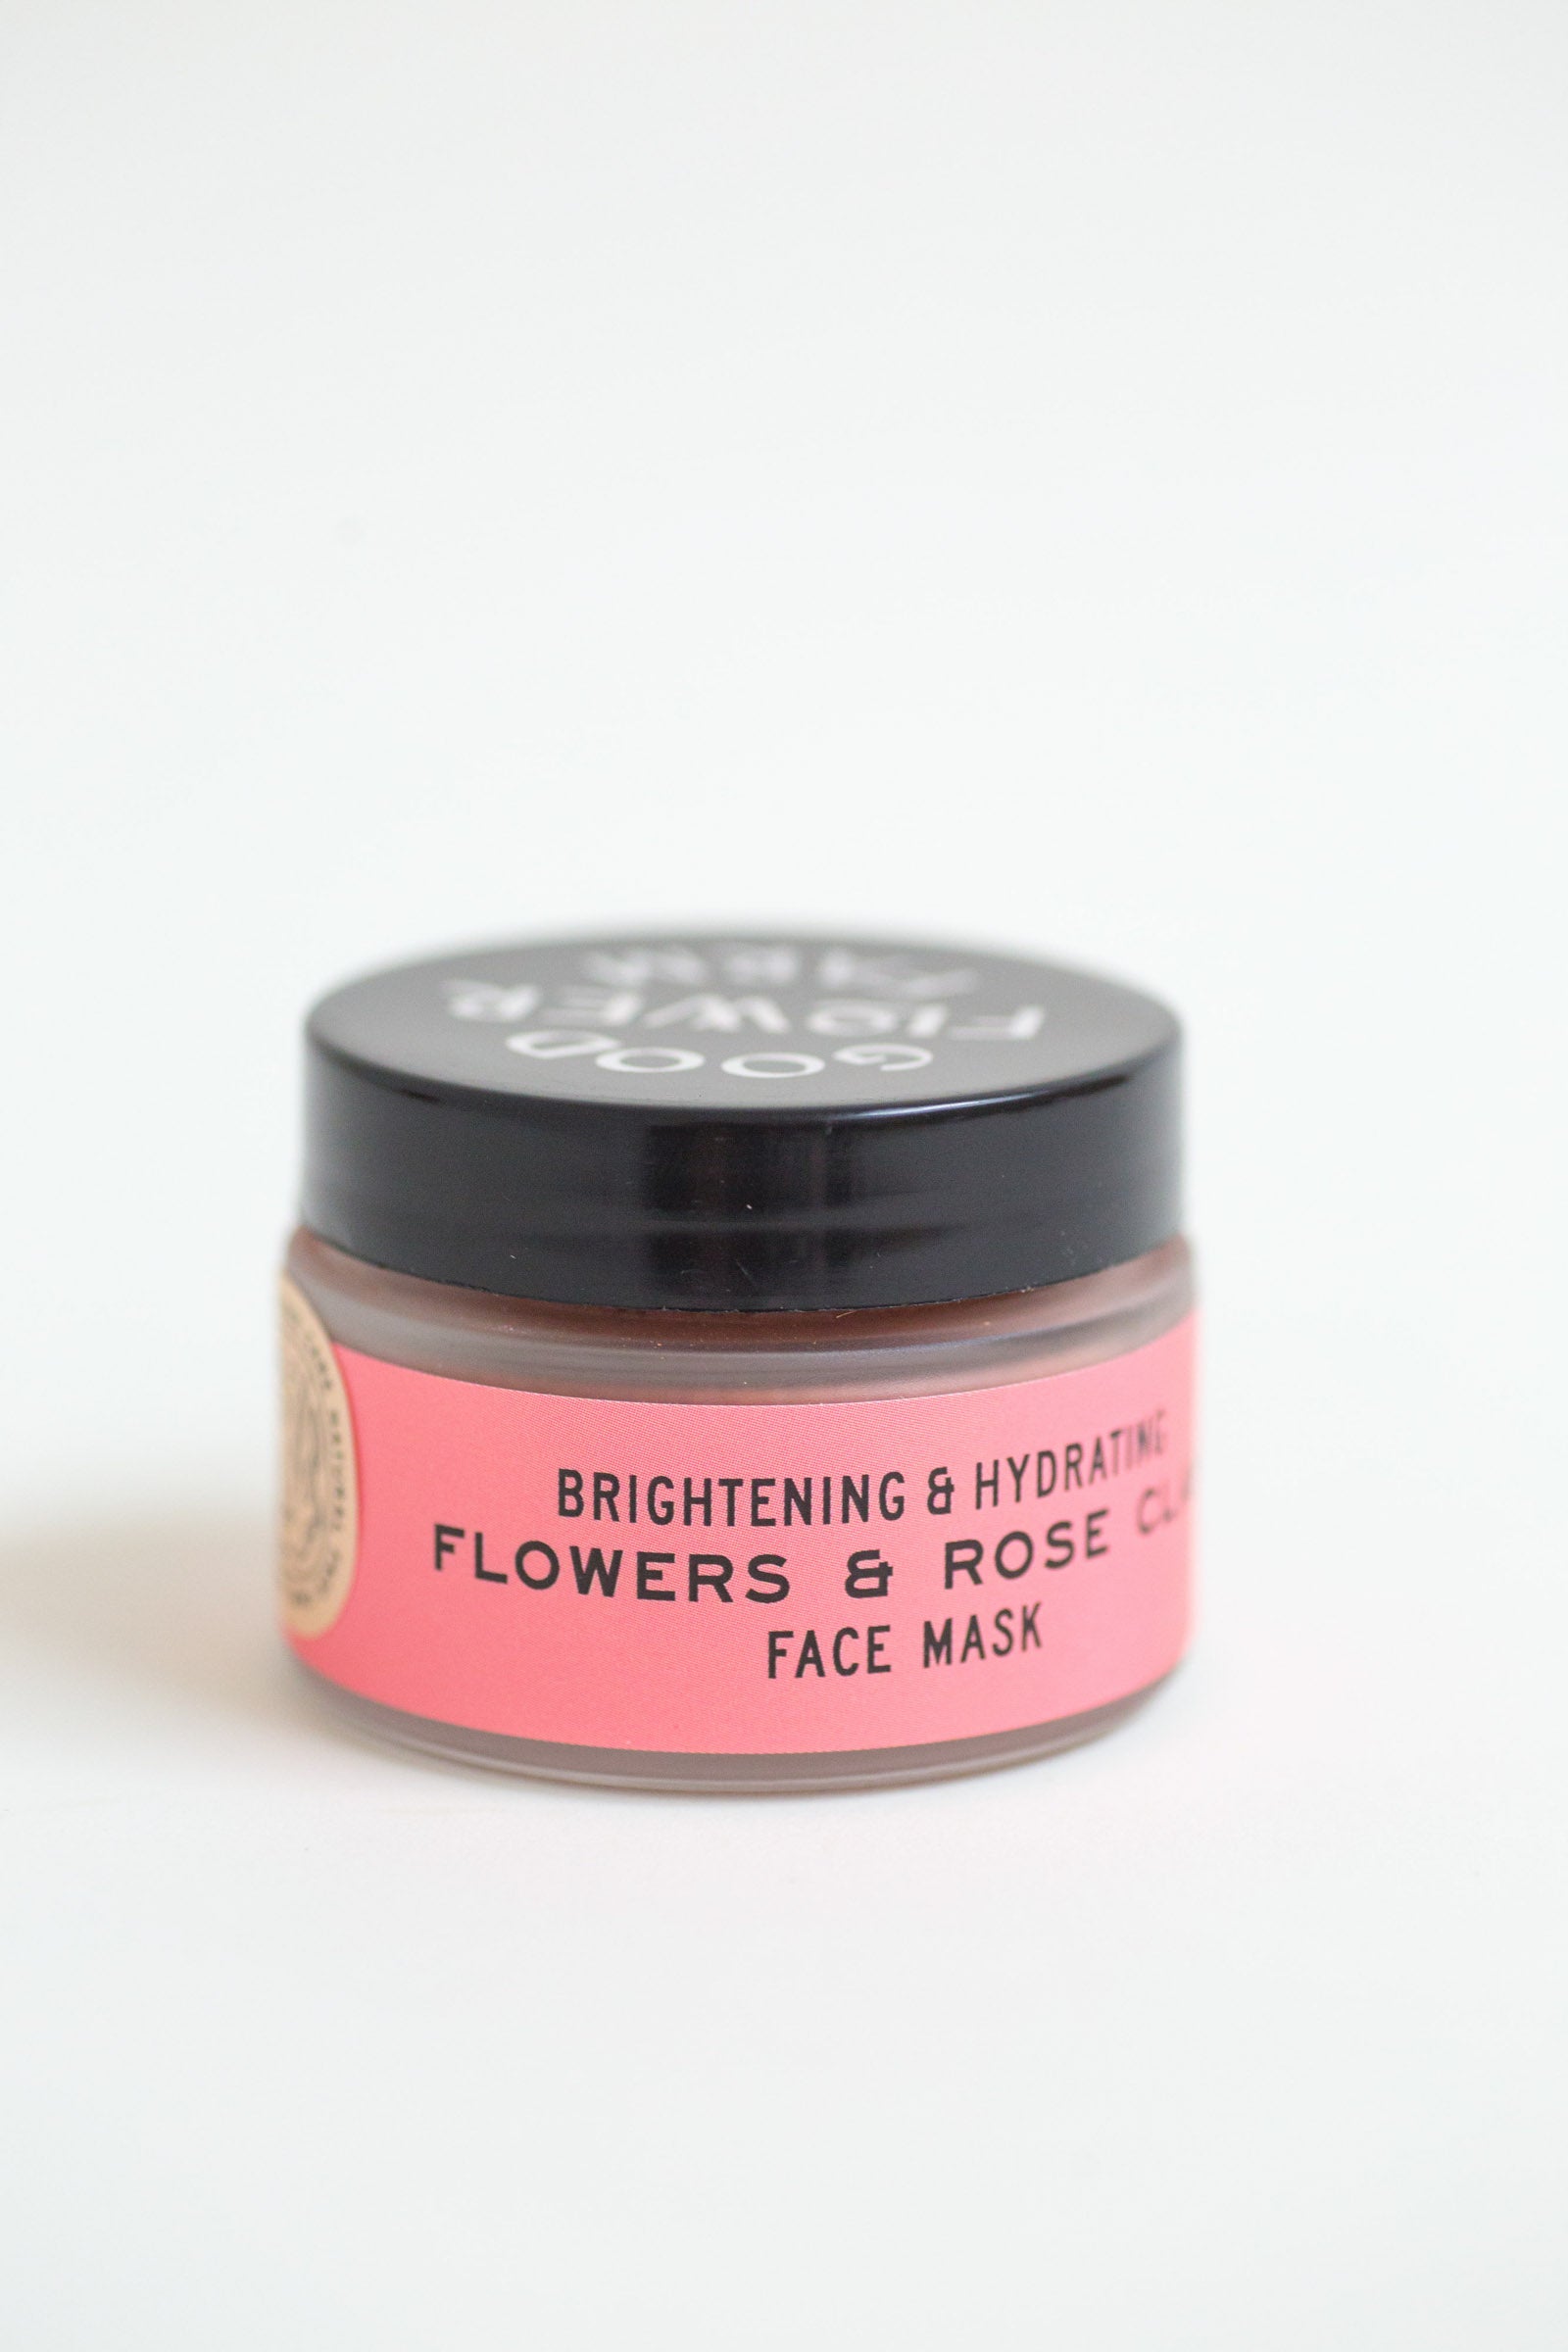 Flowers & Rose Clay Botanical Face Mask by Good Flower Farm